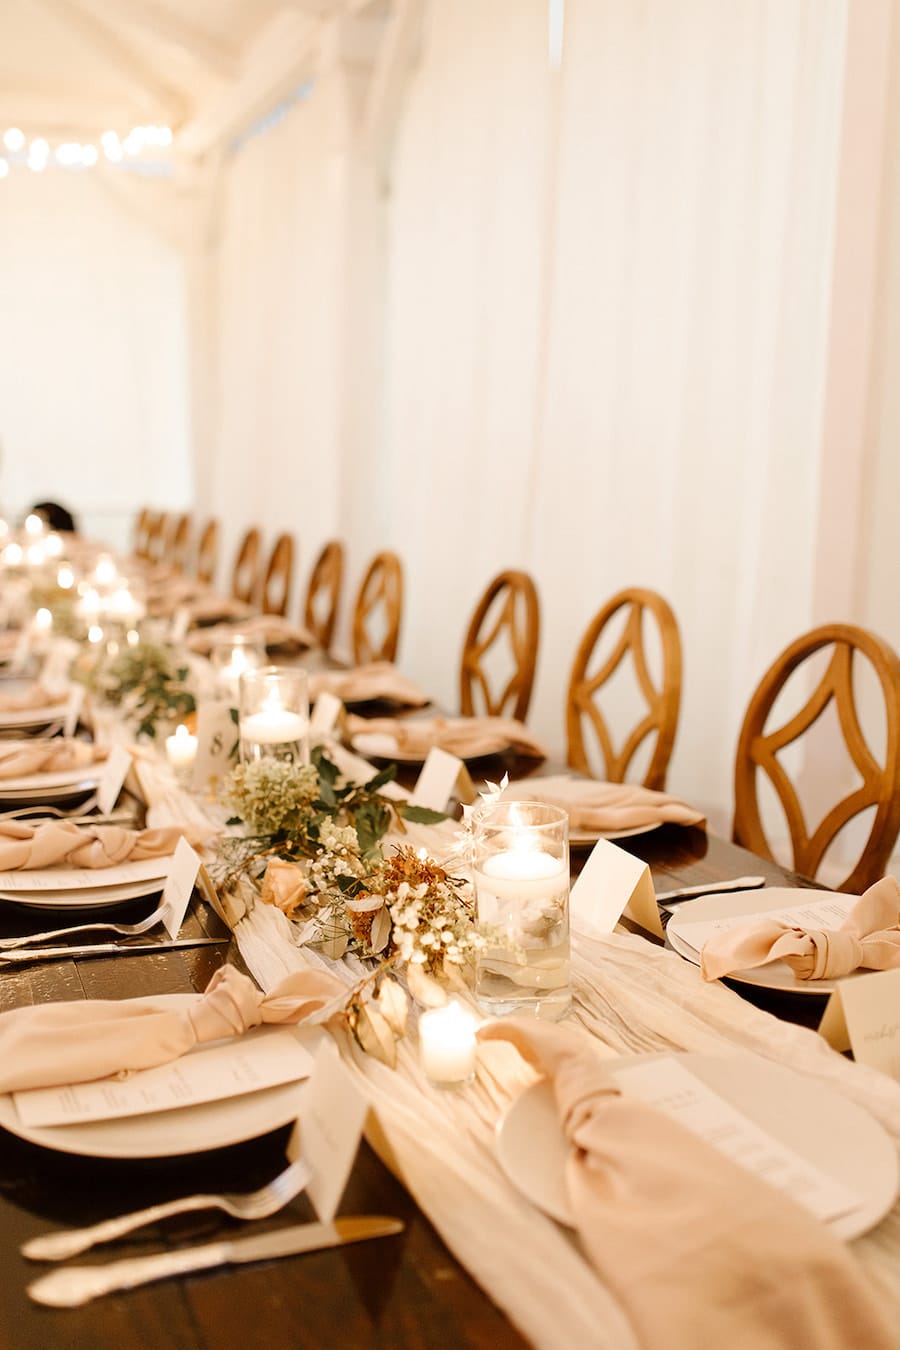 Outdoor Wedding Reception Near Nashville with Earth Tones and Candles